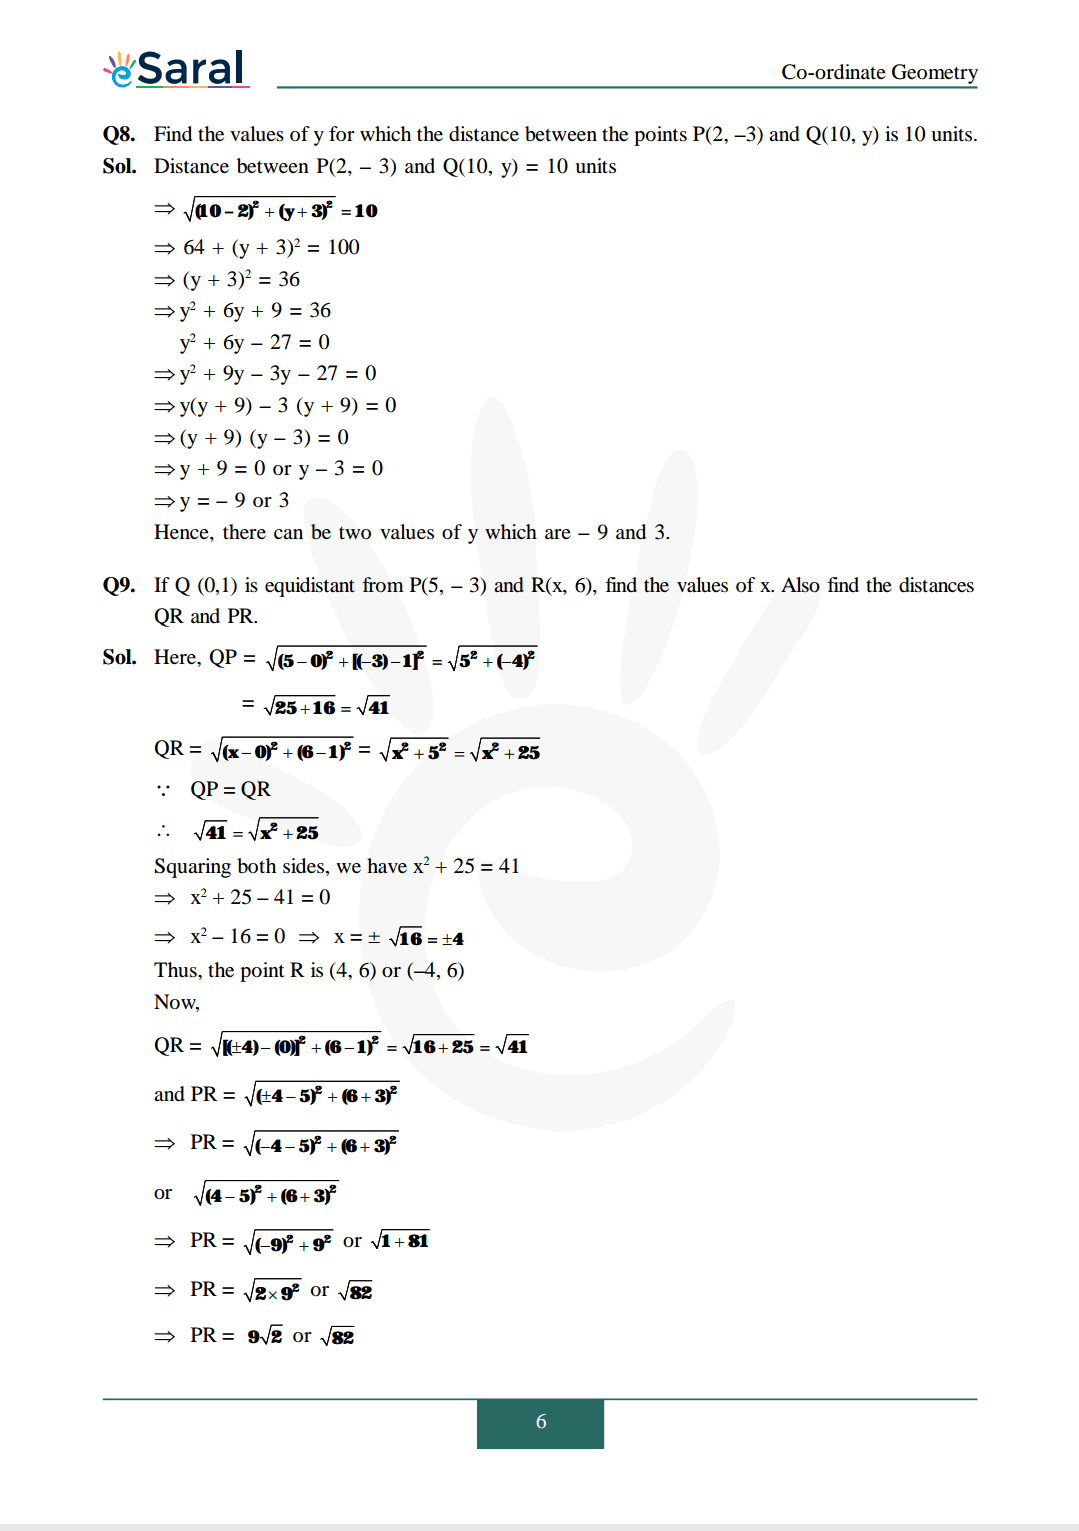 Class 10 Maths Chapter 7 exercise 7.1 solutions Image 6